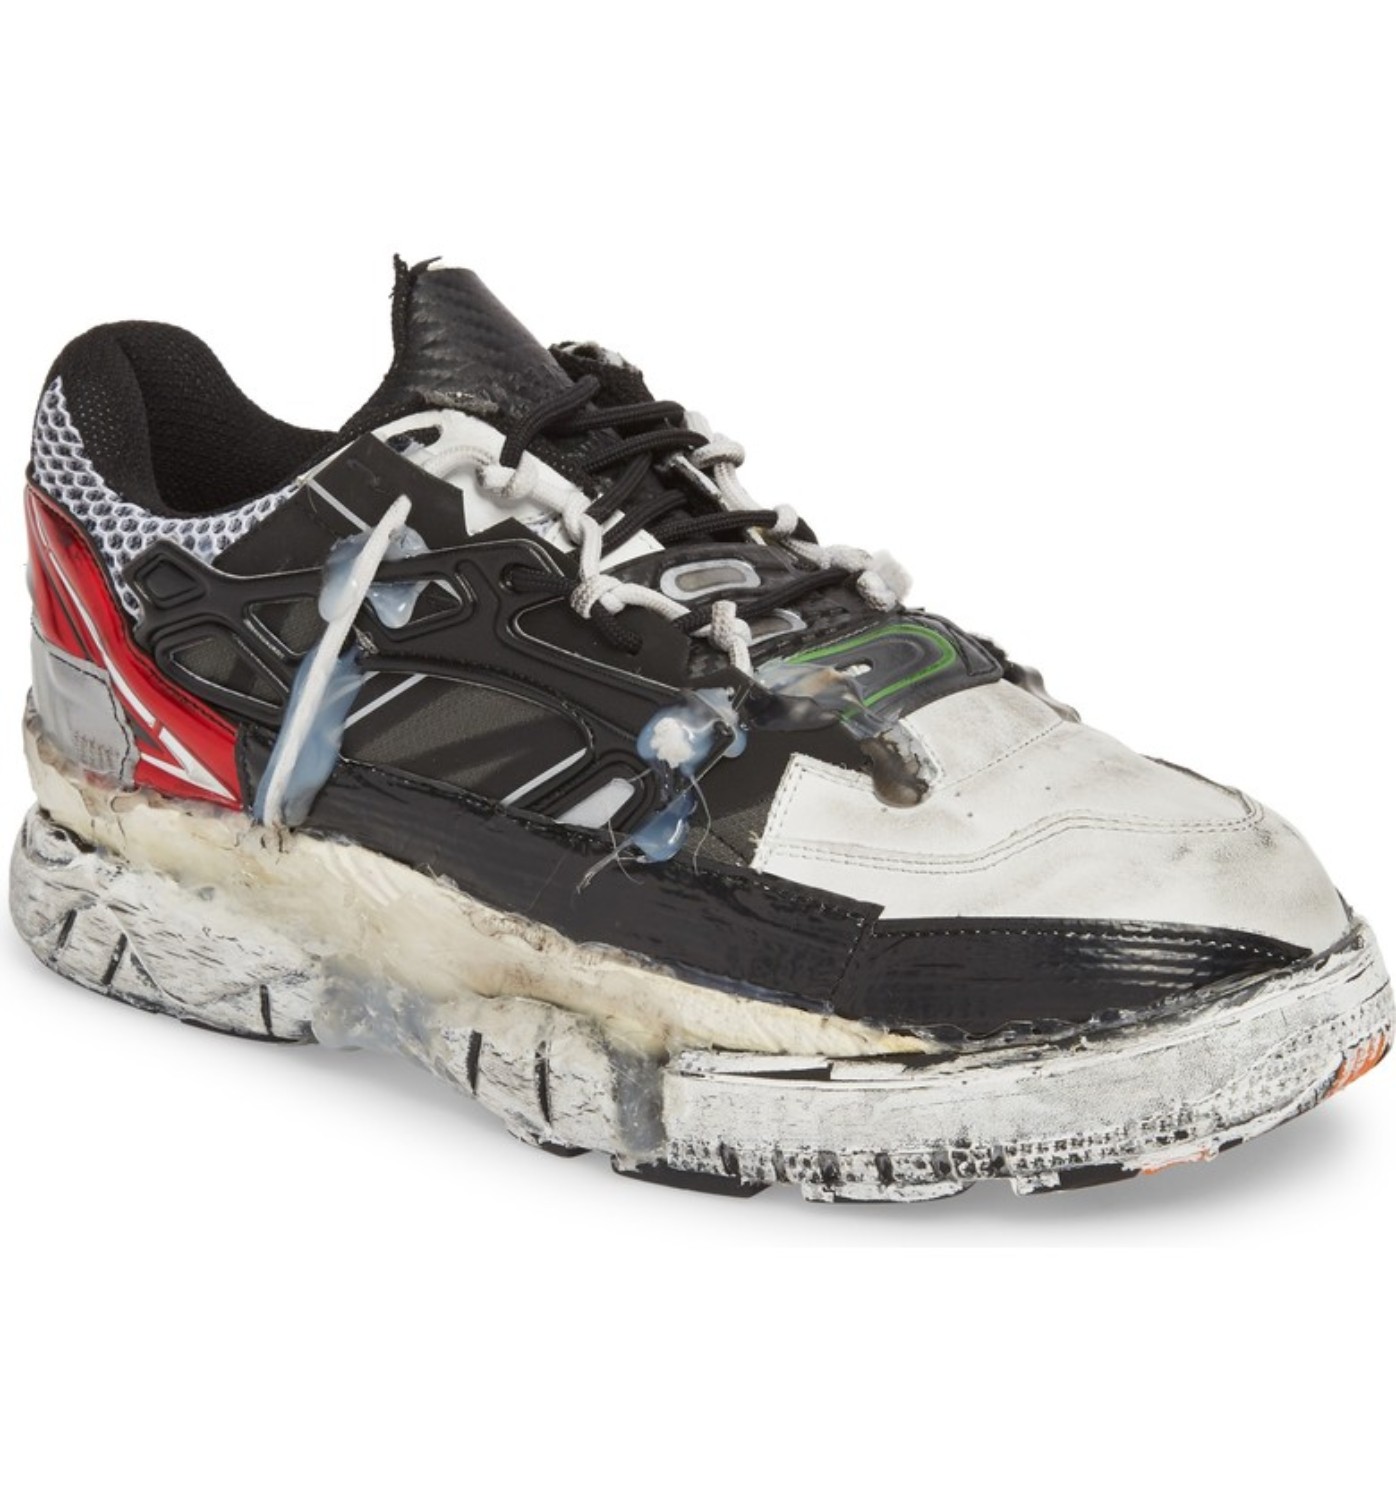 MM6 Masion Margiela Fusion Sneakers Take Hyper Real Approach To ...